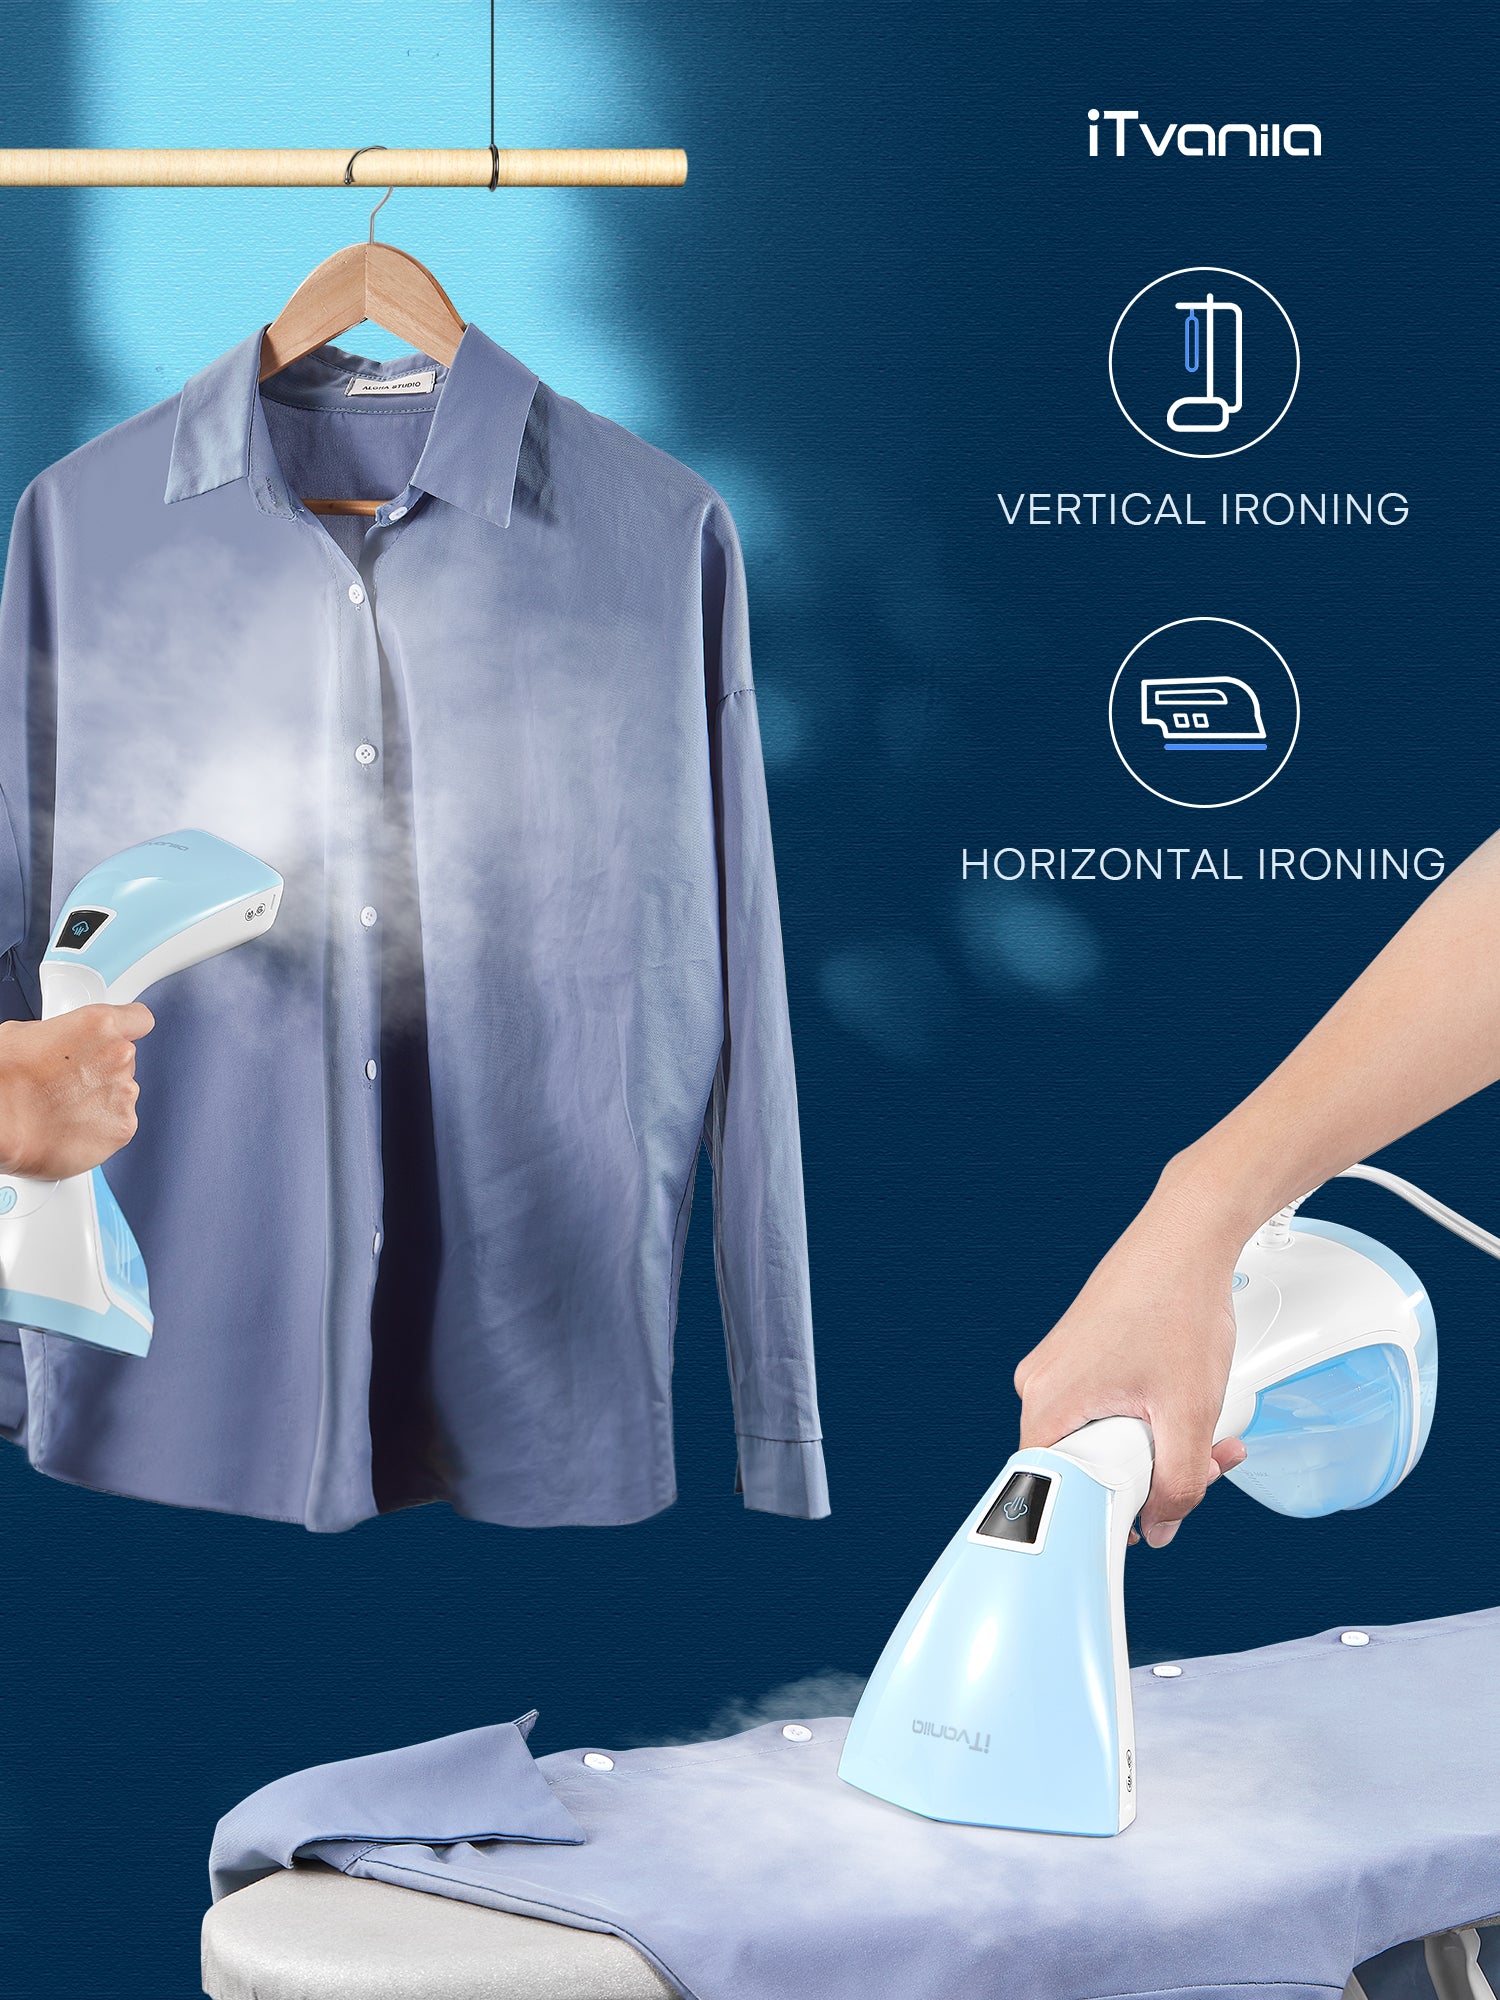 Garment Steamer, Portable Steamer for Clothes, Handheld Fabric Steamers with Pump, Removes Wrinkles, 15-Second Fast Heat-up, 1200W Powerful 